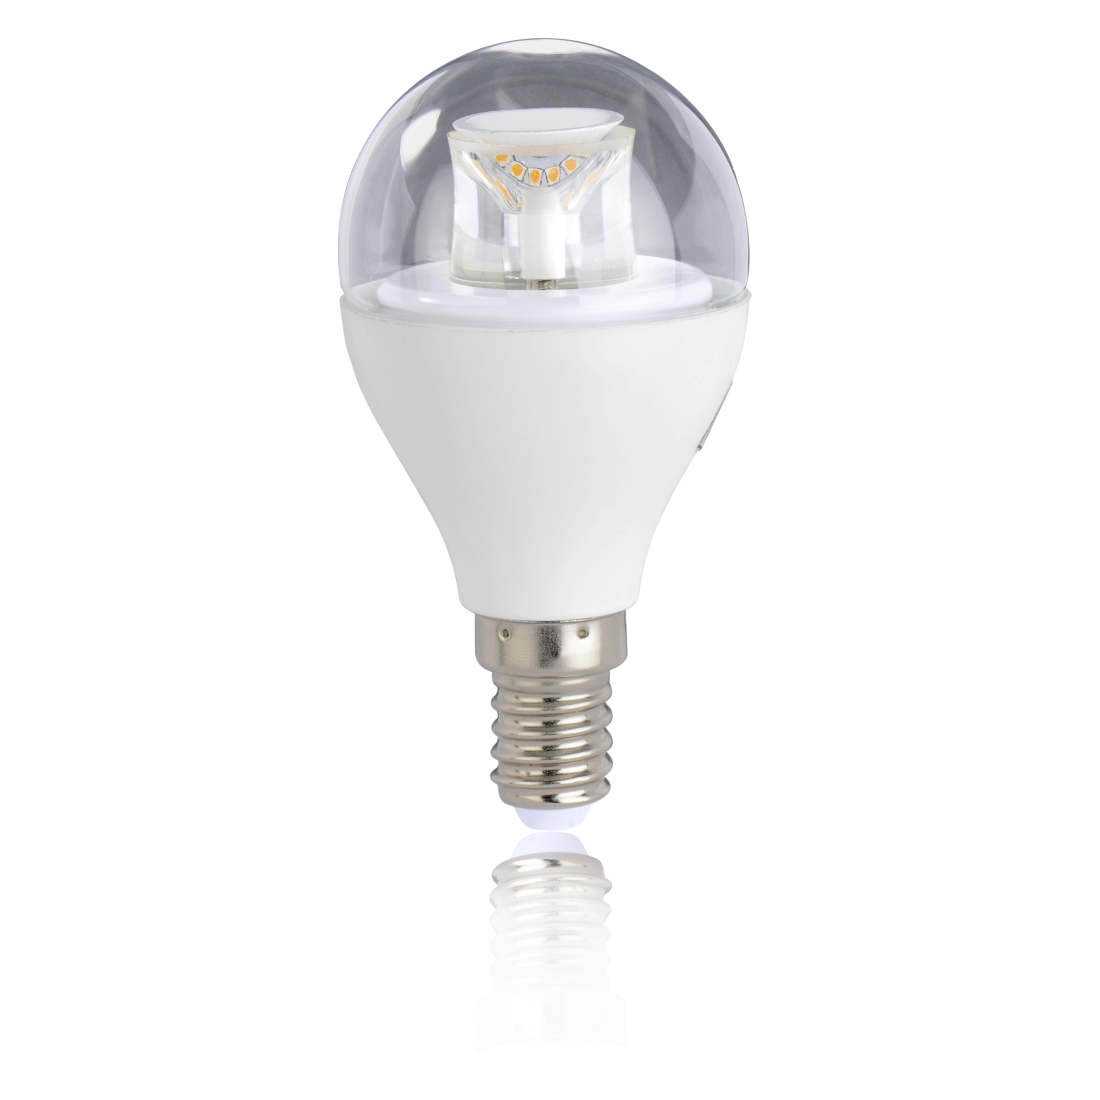 abx2 High-Res Image 2 - Xavax, LED Bulb, E14, 470lm replaces 40W, drop bulb, warm white, dimmable